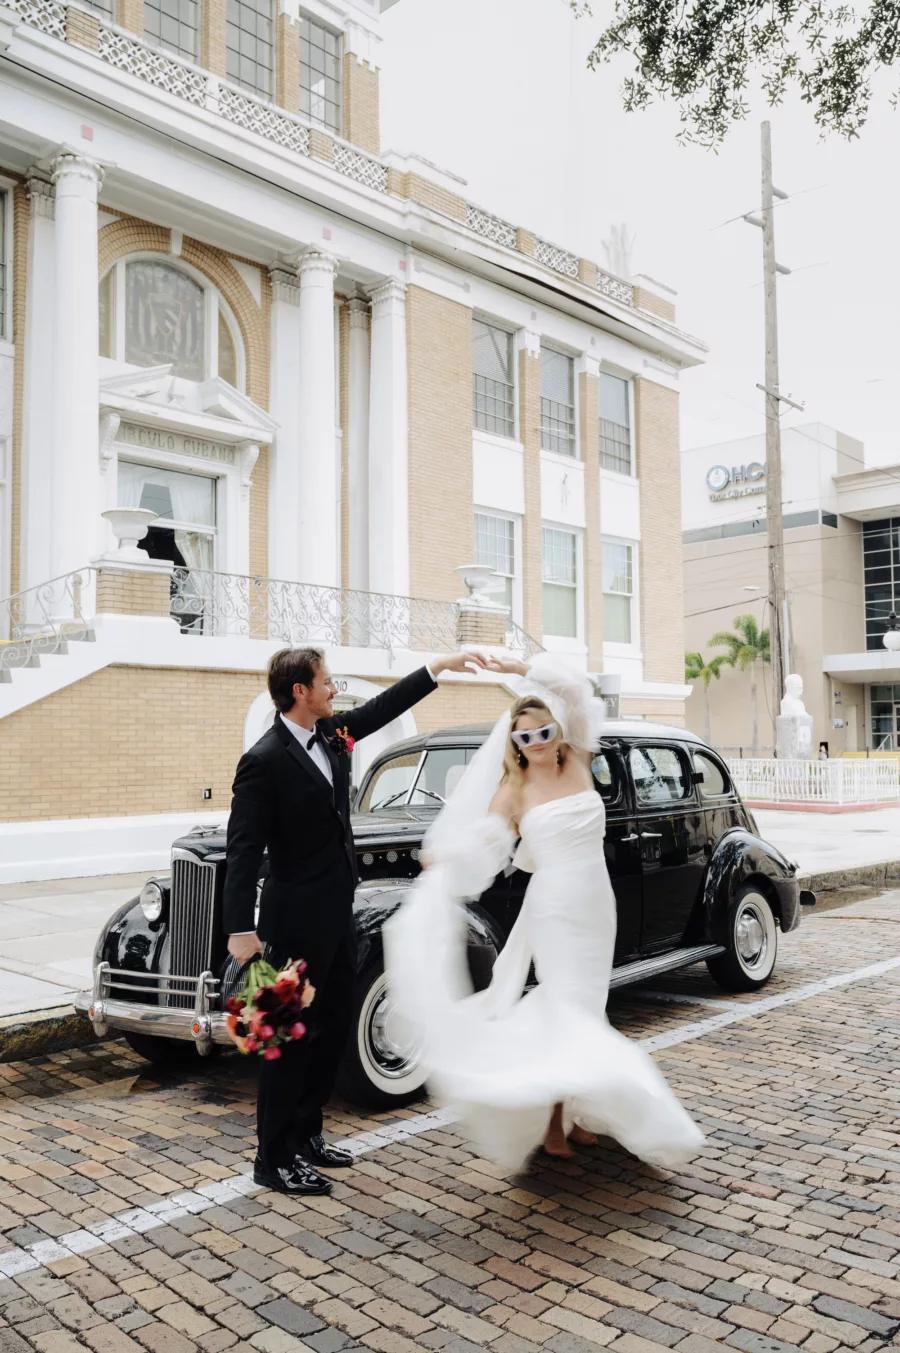 Bride and Groom Dancing in the Road with Classic Wedding Day Getaway Car Ideas | Tampa Bay Car Rental Classically Ever After | Photographer McNeile Photography | Planner EventFull Weddings | Content Creator Behind the Vows